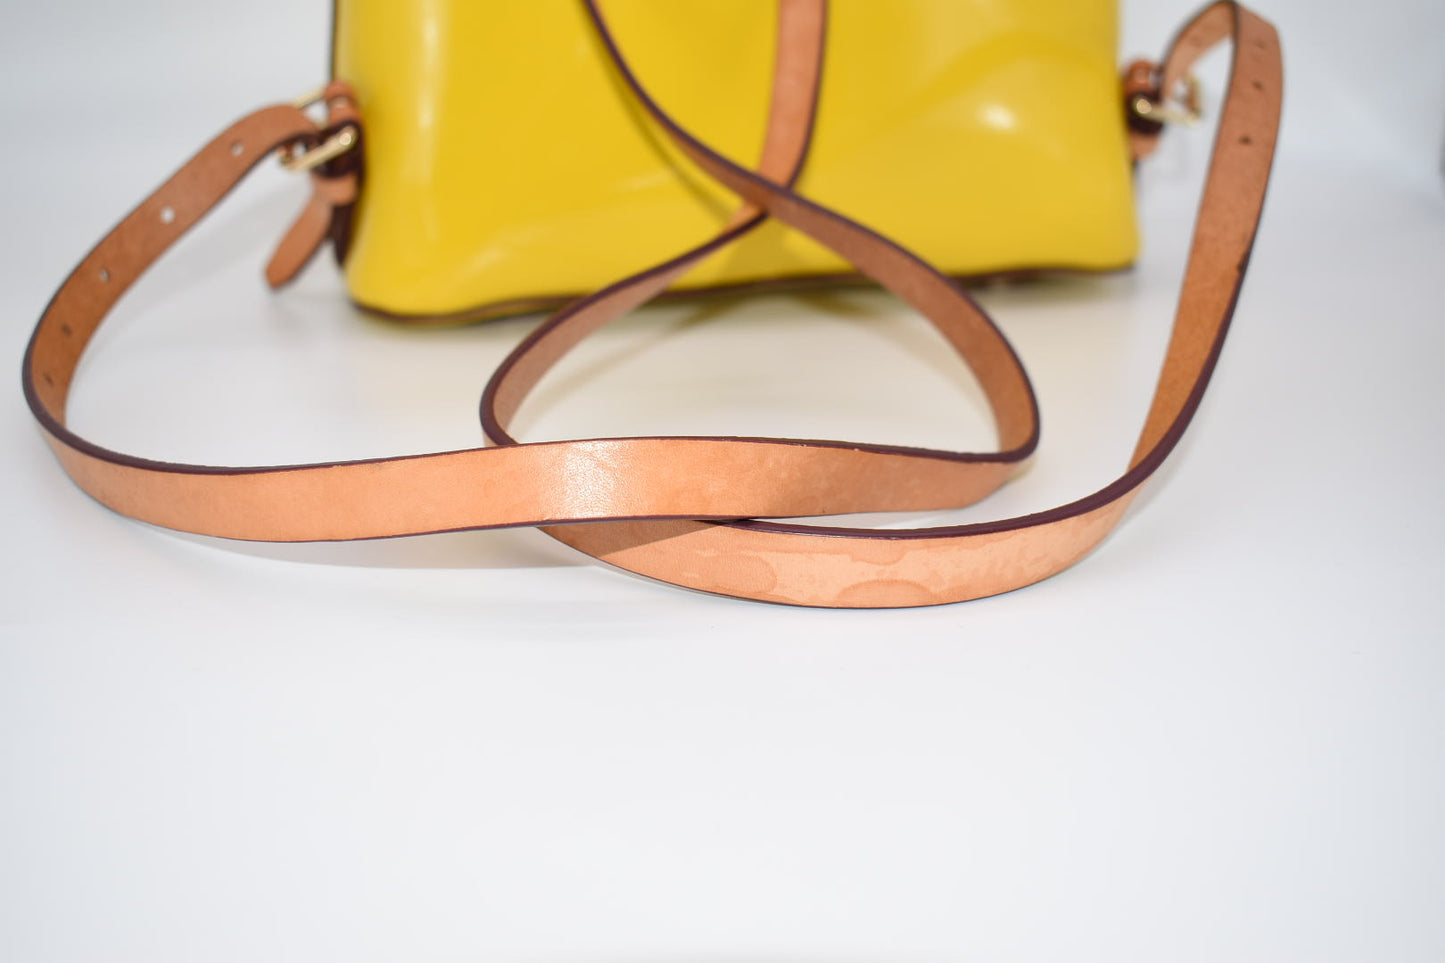 Dooney & Bourke Patent Leather Backpack in Yellow